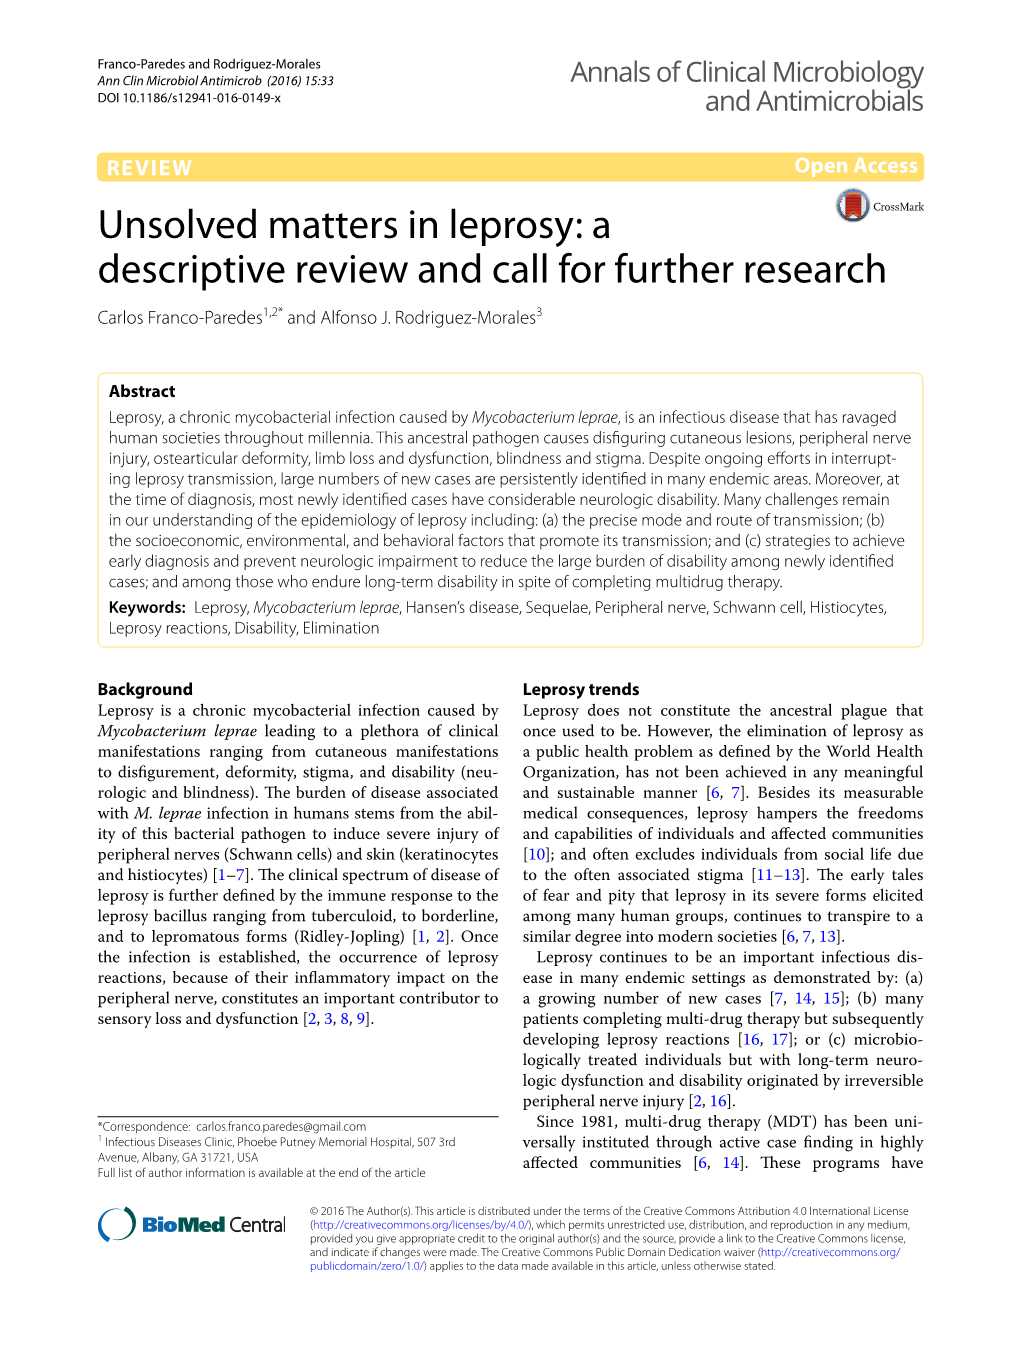 Unsolved Matters in Leprosy: a Descriptive Review and Call for Further Research Carlos Franco‑Paredes1,2* and Alfonso J